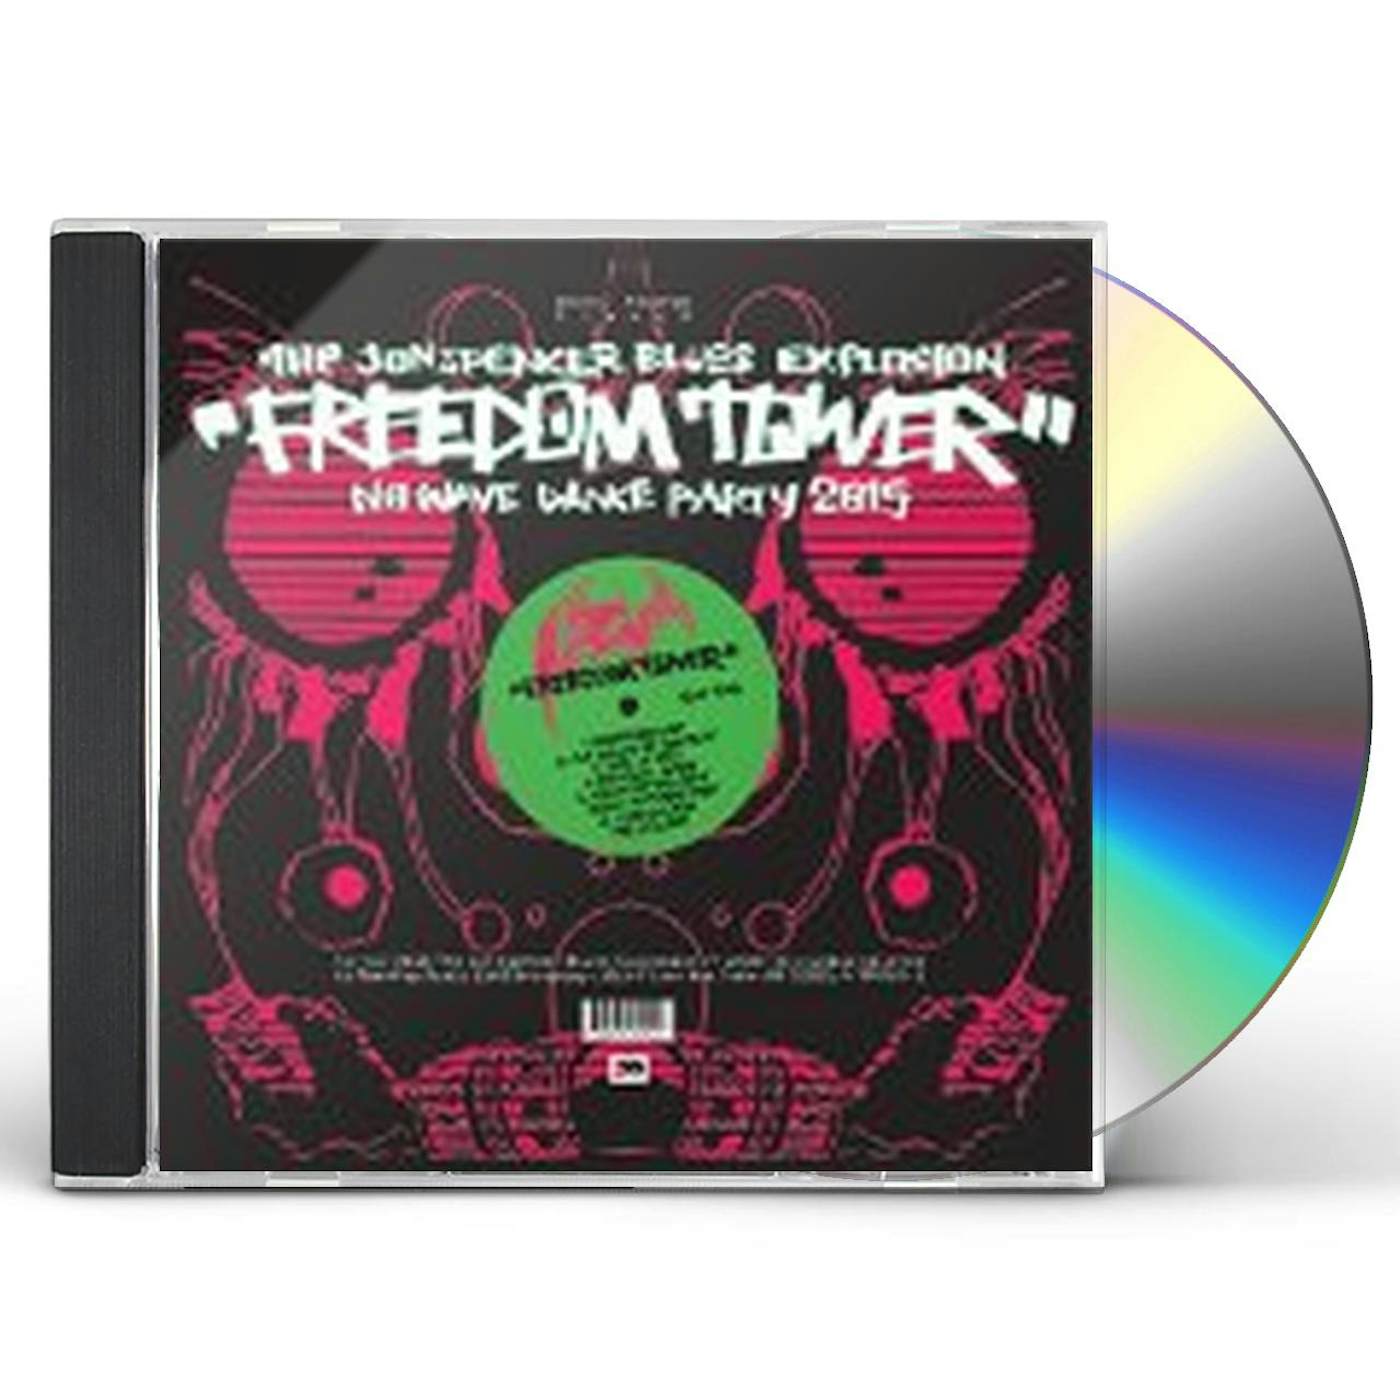 The Jon Spencer Blues Explosion FREEDOM TOWER: NO WAVE DANCE PARTY 2015 CD